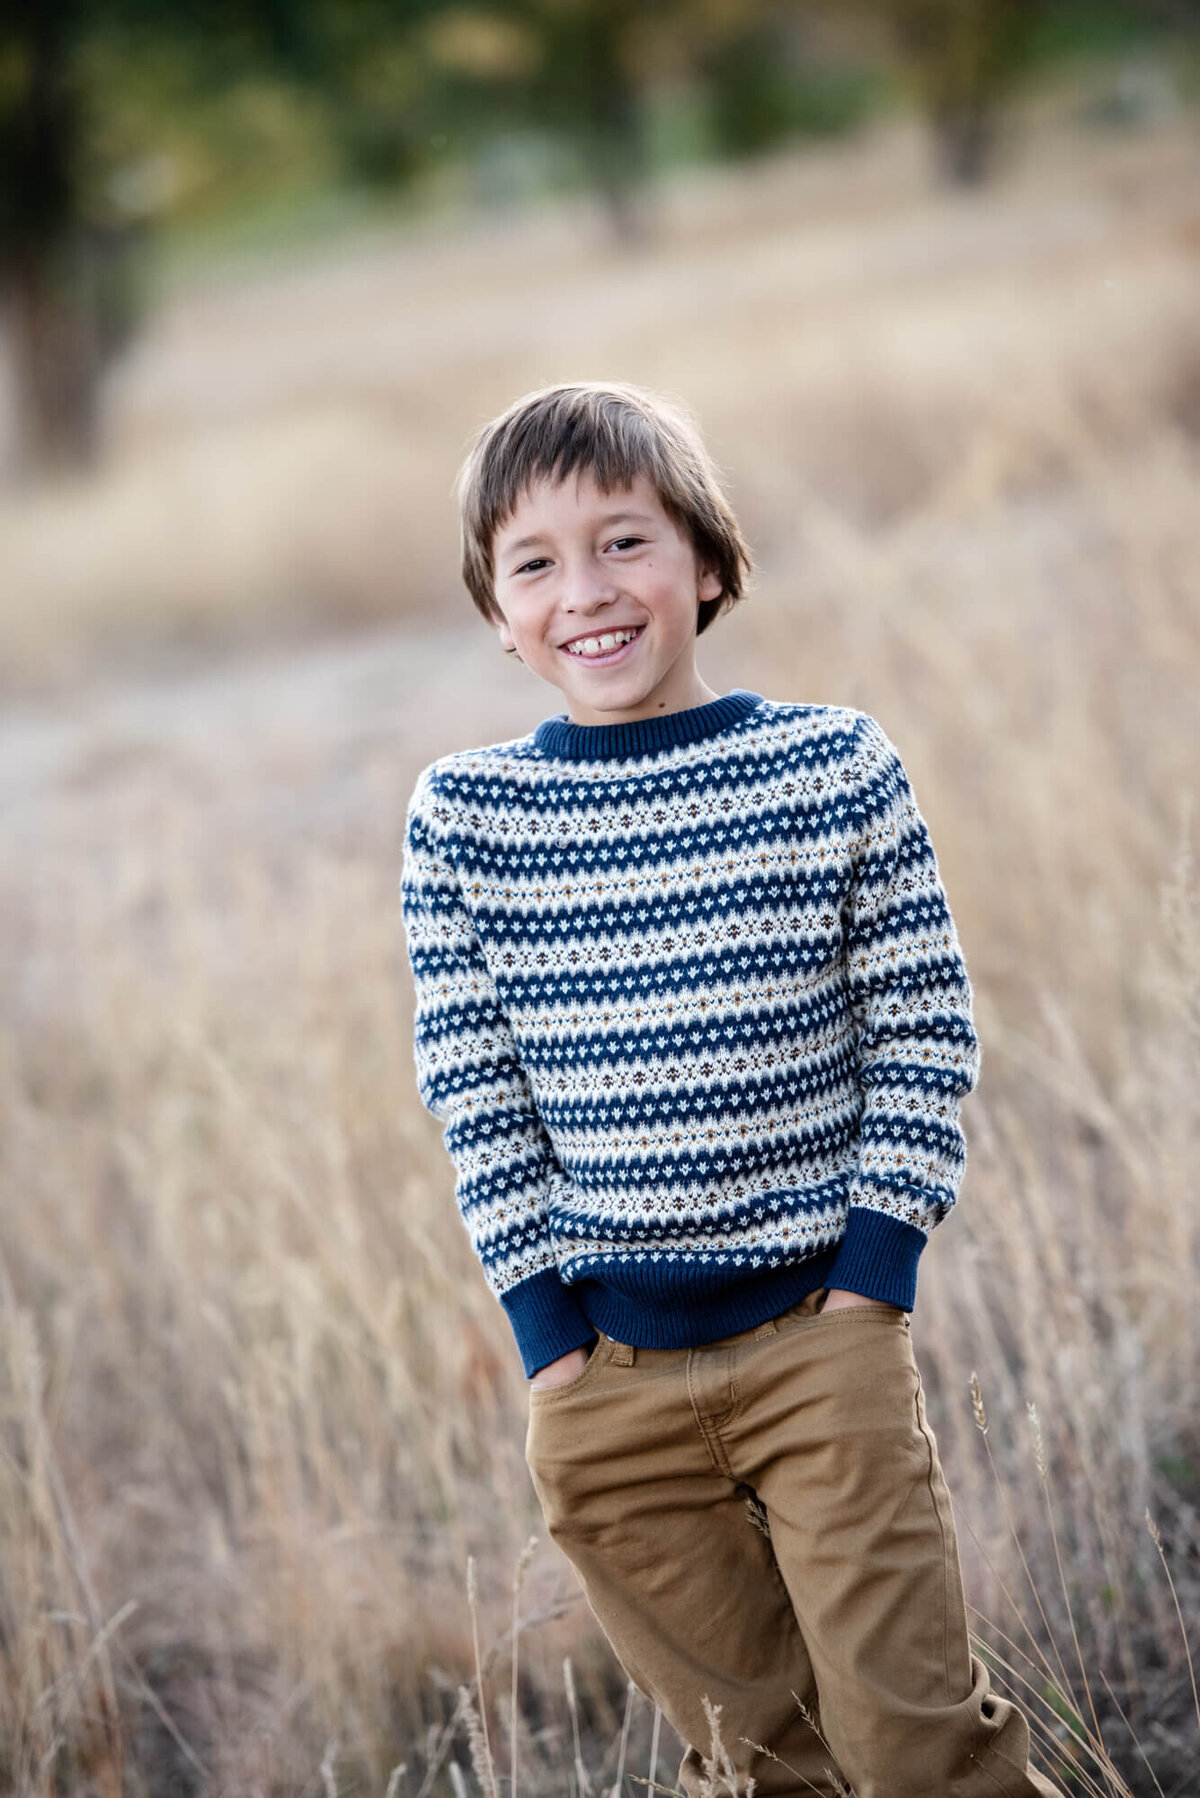 A young boy in a stripe sweater and khakis stands smiling in a field at sunset with hands in pockets